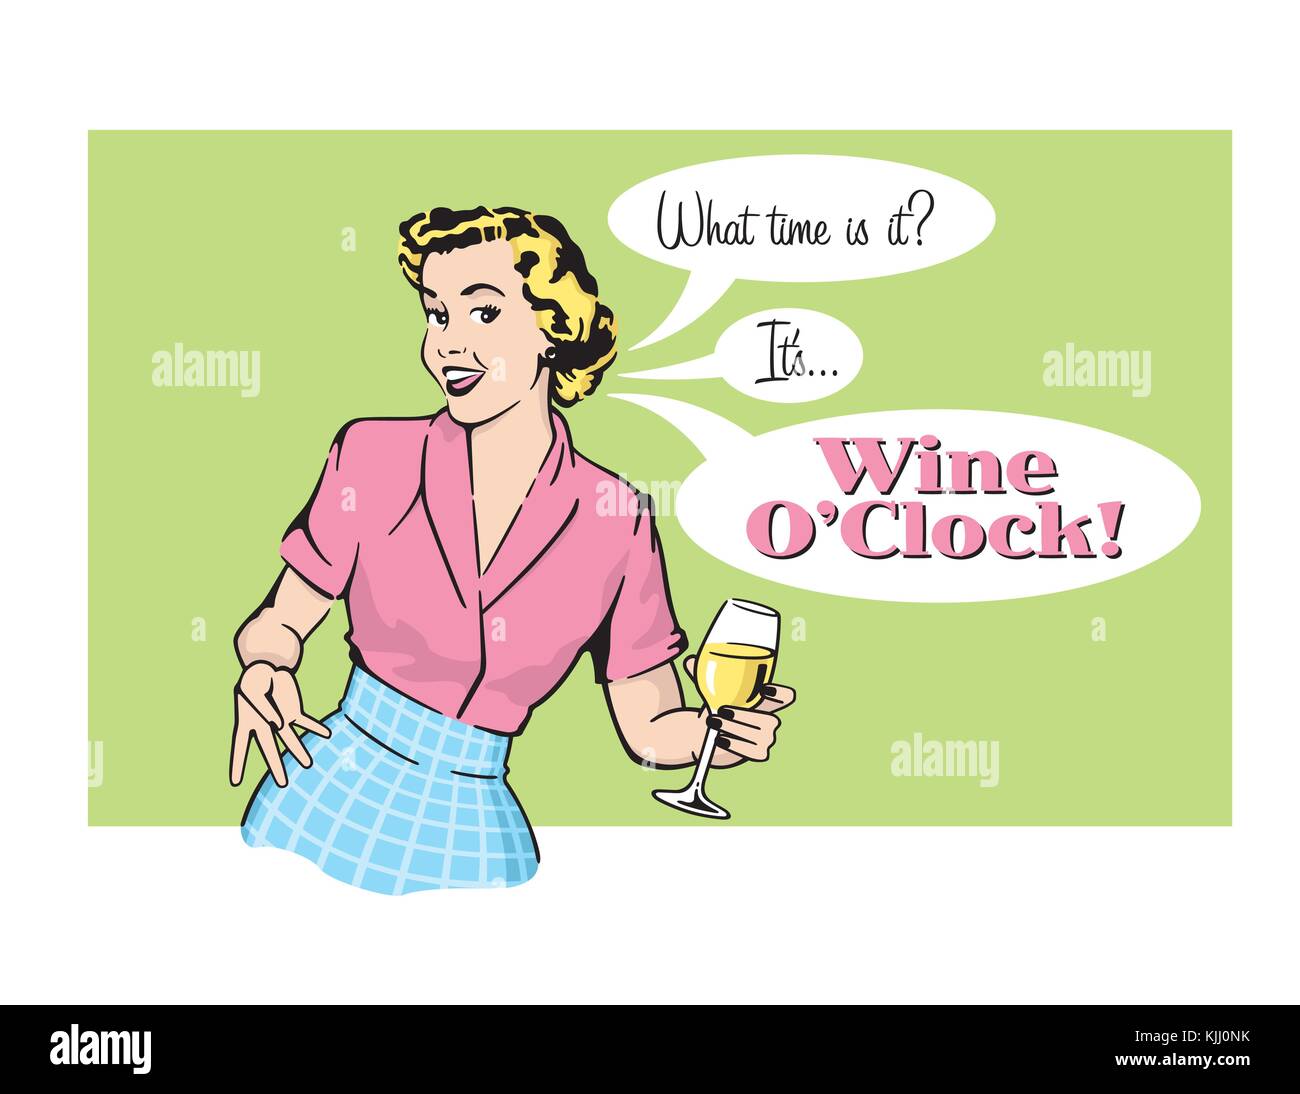 Wine Oclock Retro Housewife Vector Graphic. Vector illustration of sassy retro woman announcing that it is wine oclock. Vintage 1950s style graphics. Stock Vector